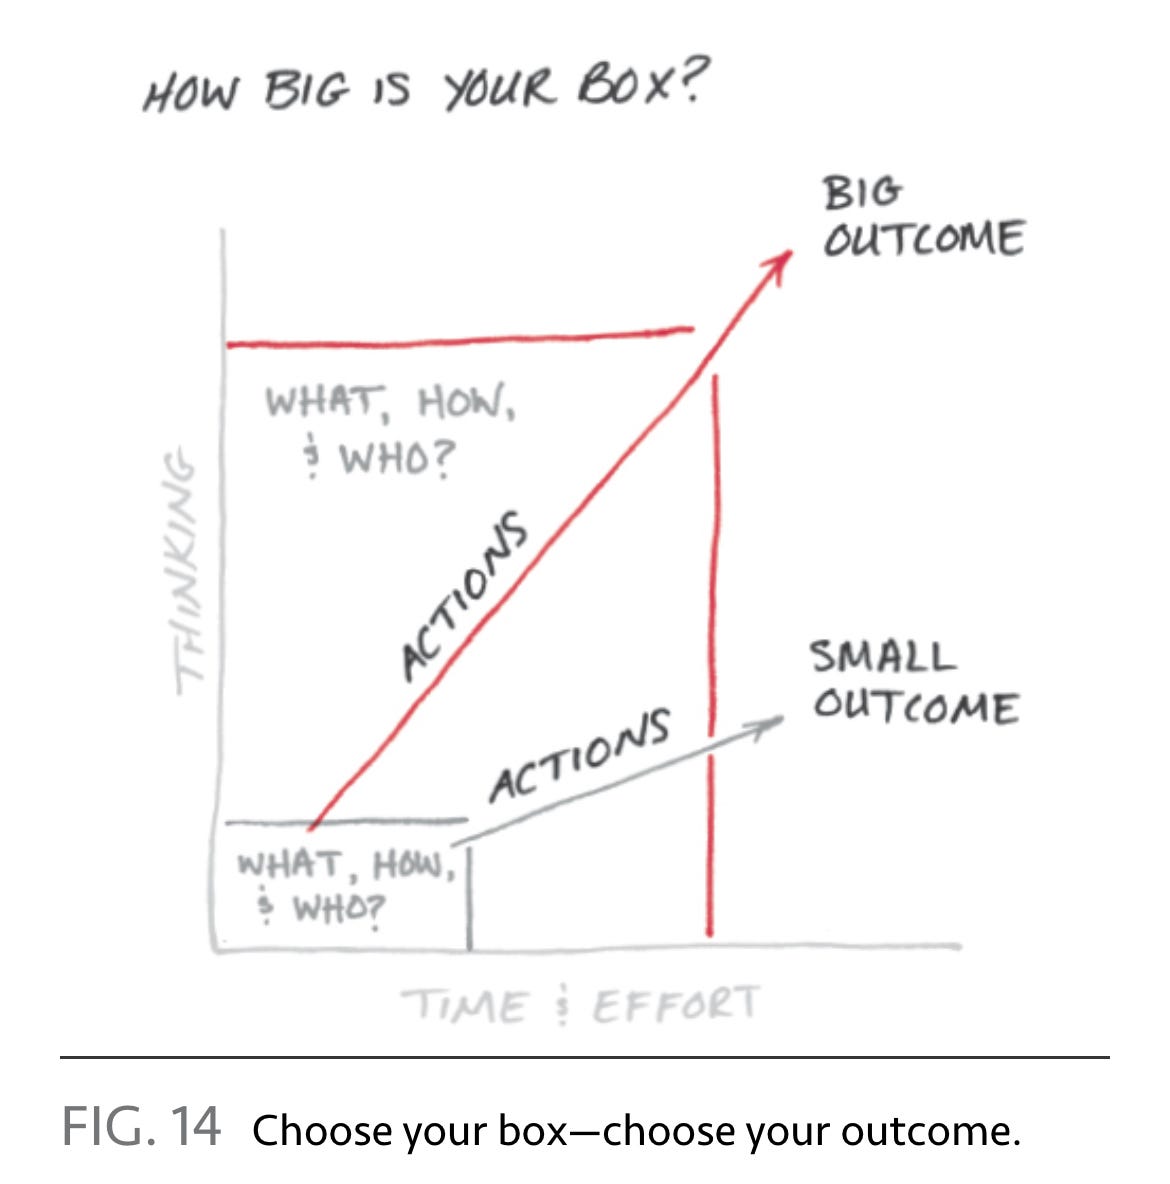 An image of an inscrutable graph titled "How big is your box?" from the self-help book "The ONE Thing"